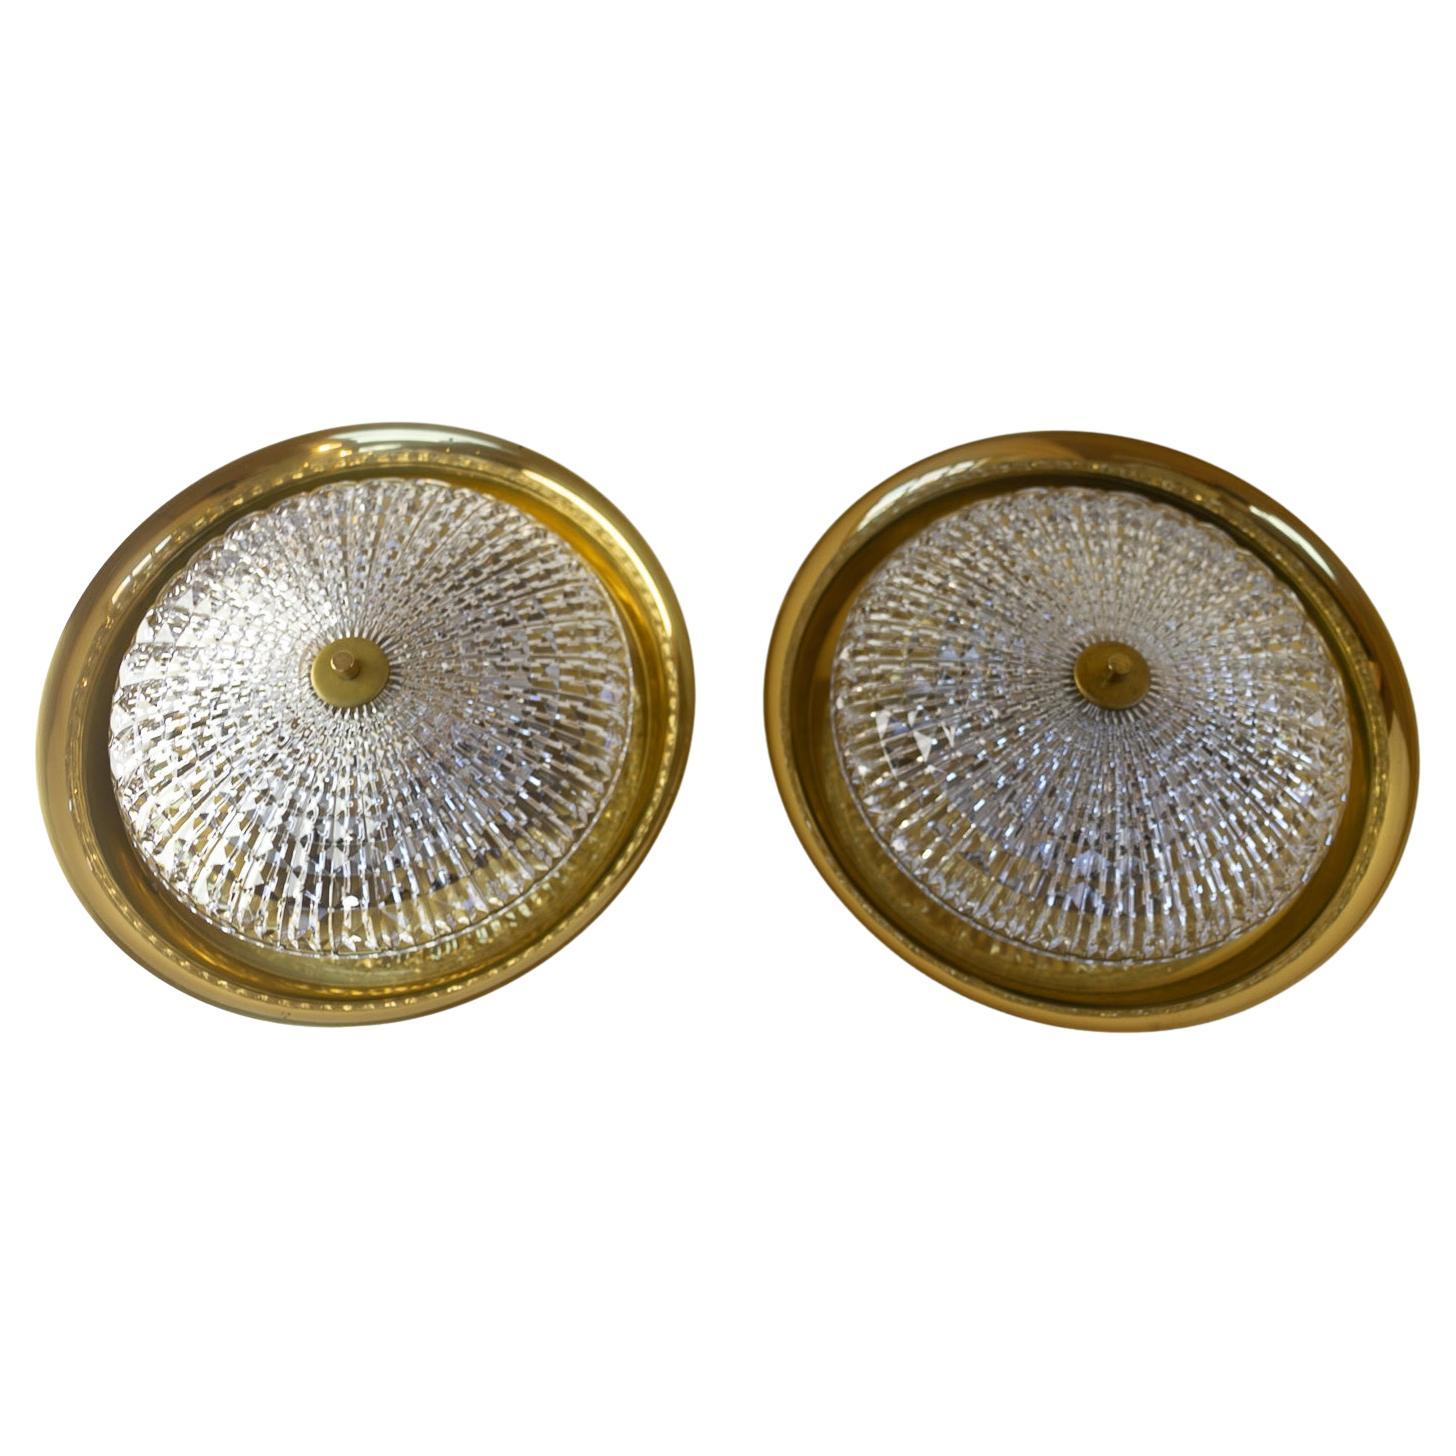 Orrefors Brass Wall or Ceiling Lamps by Fagerlund for Lyfa, 1960s. Set of 2. For Sale